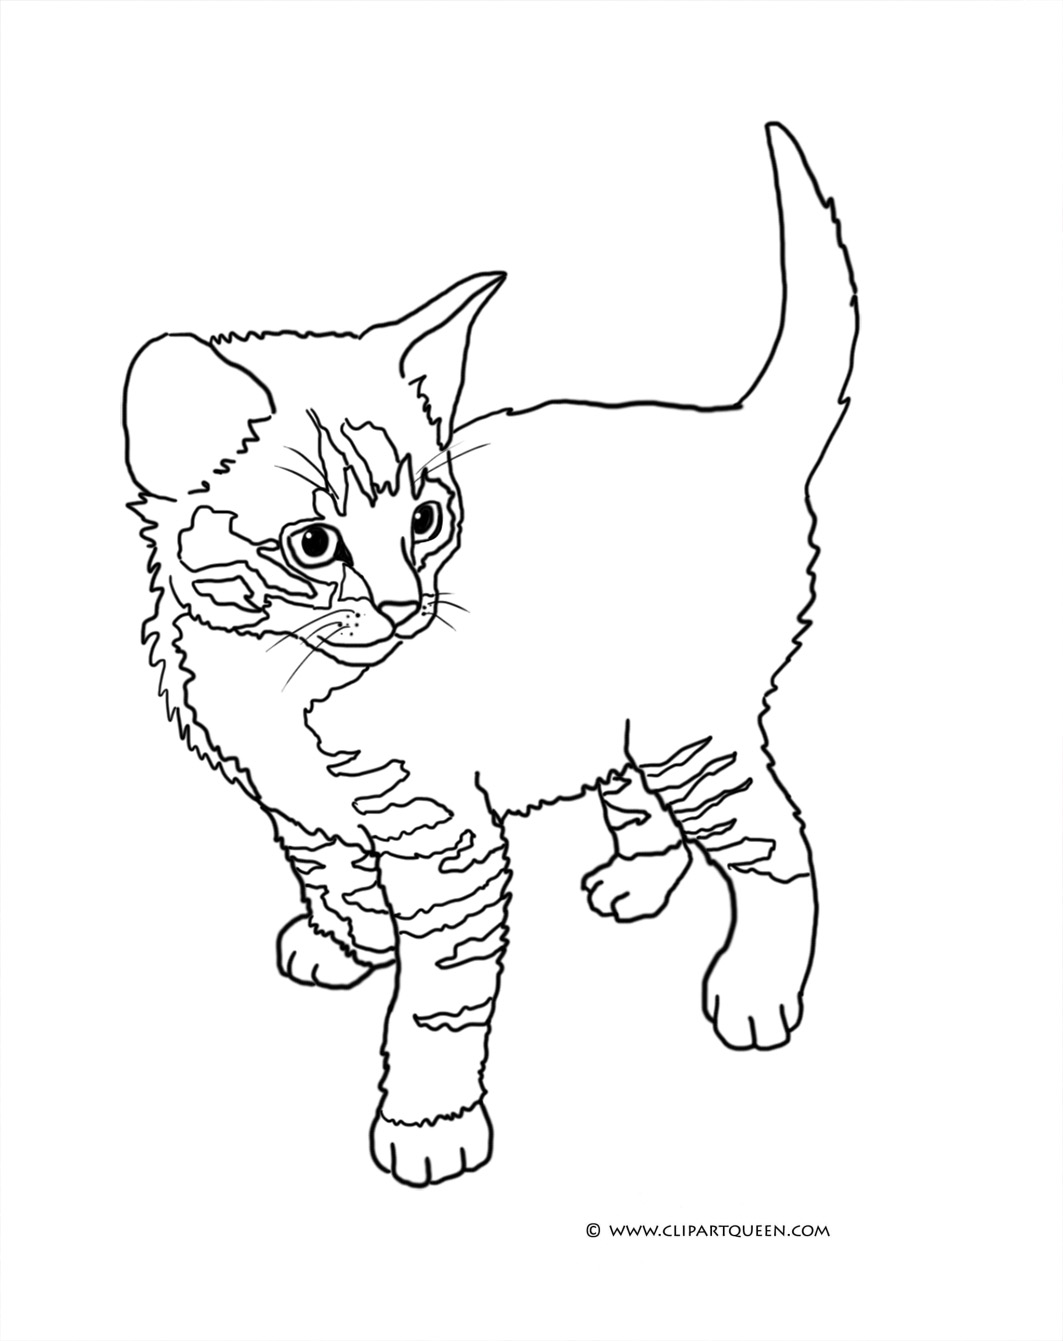 Download Cat Coloring Pages